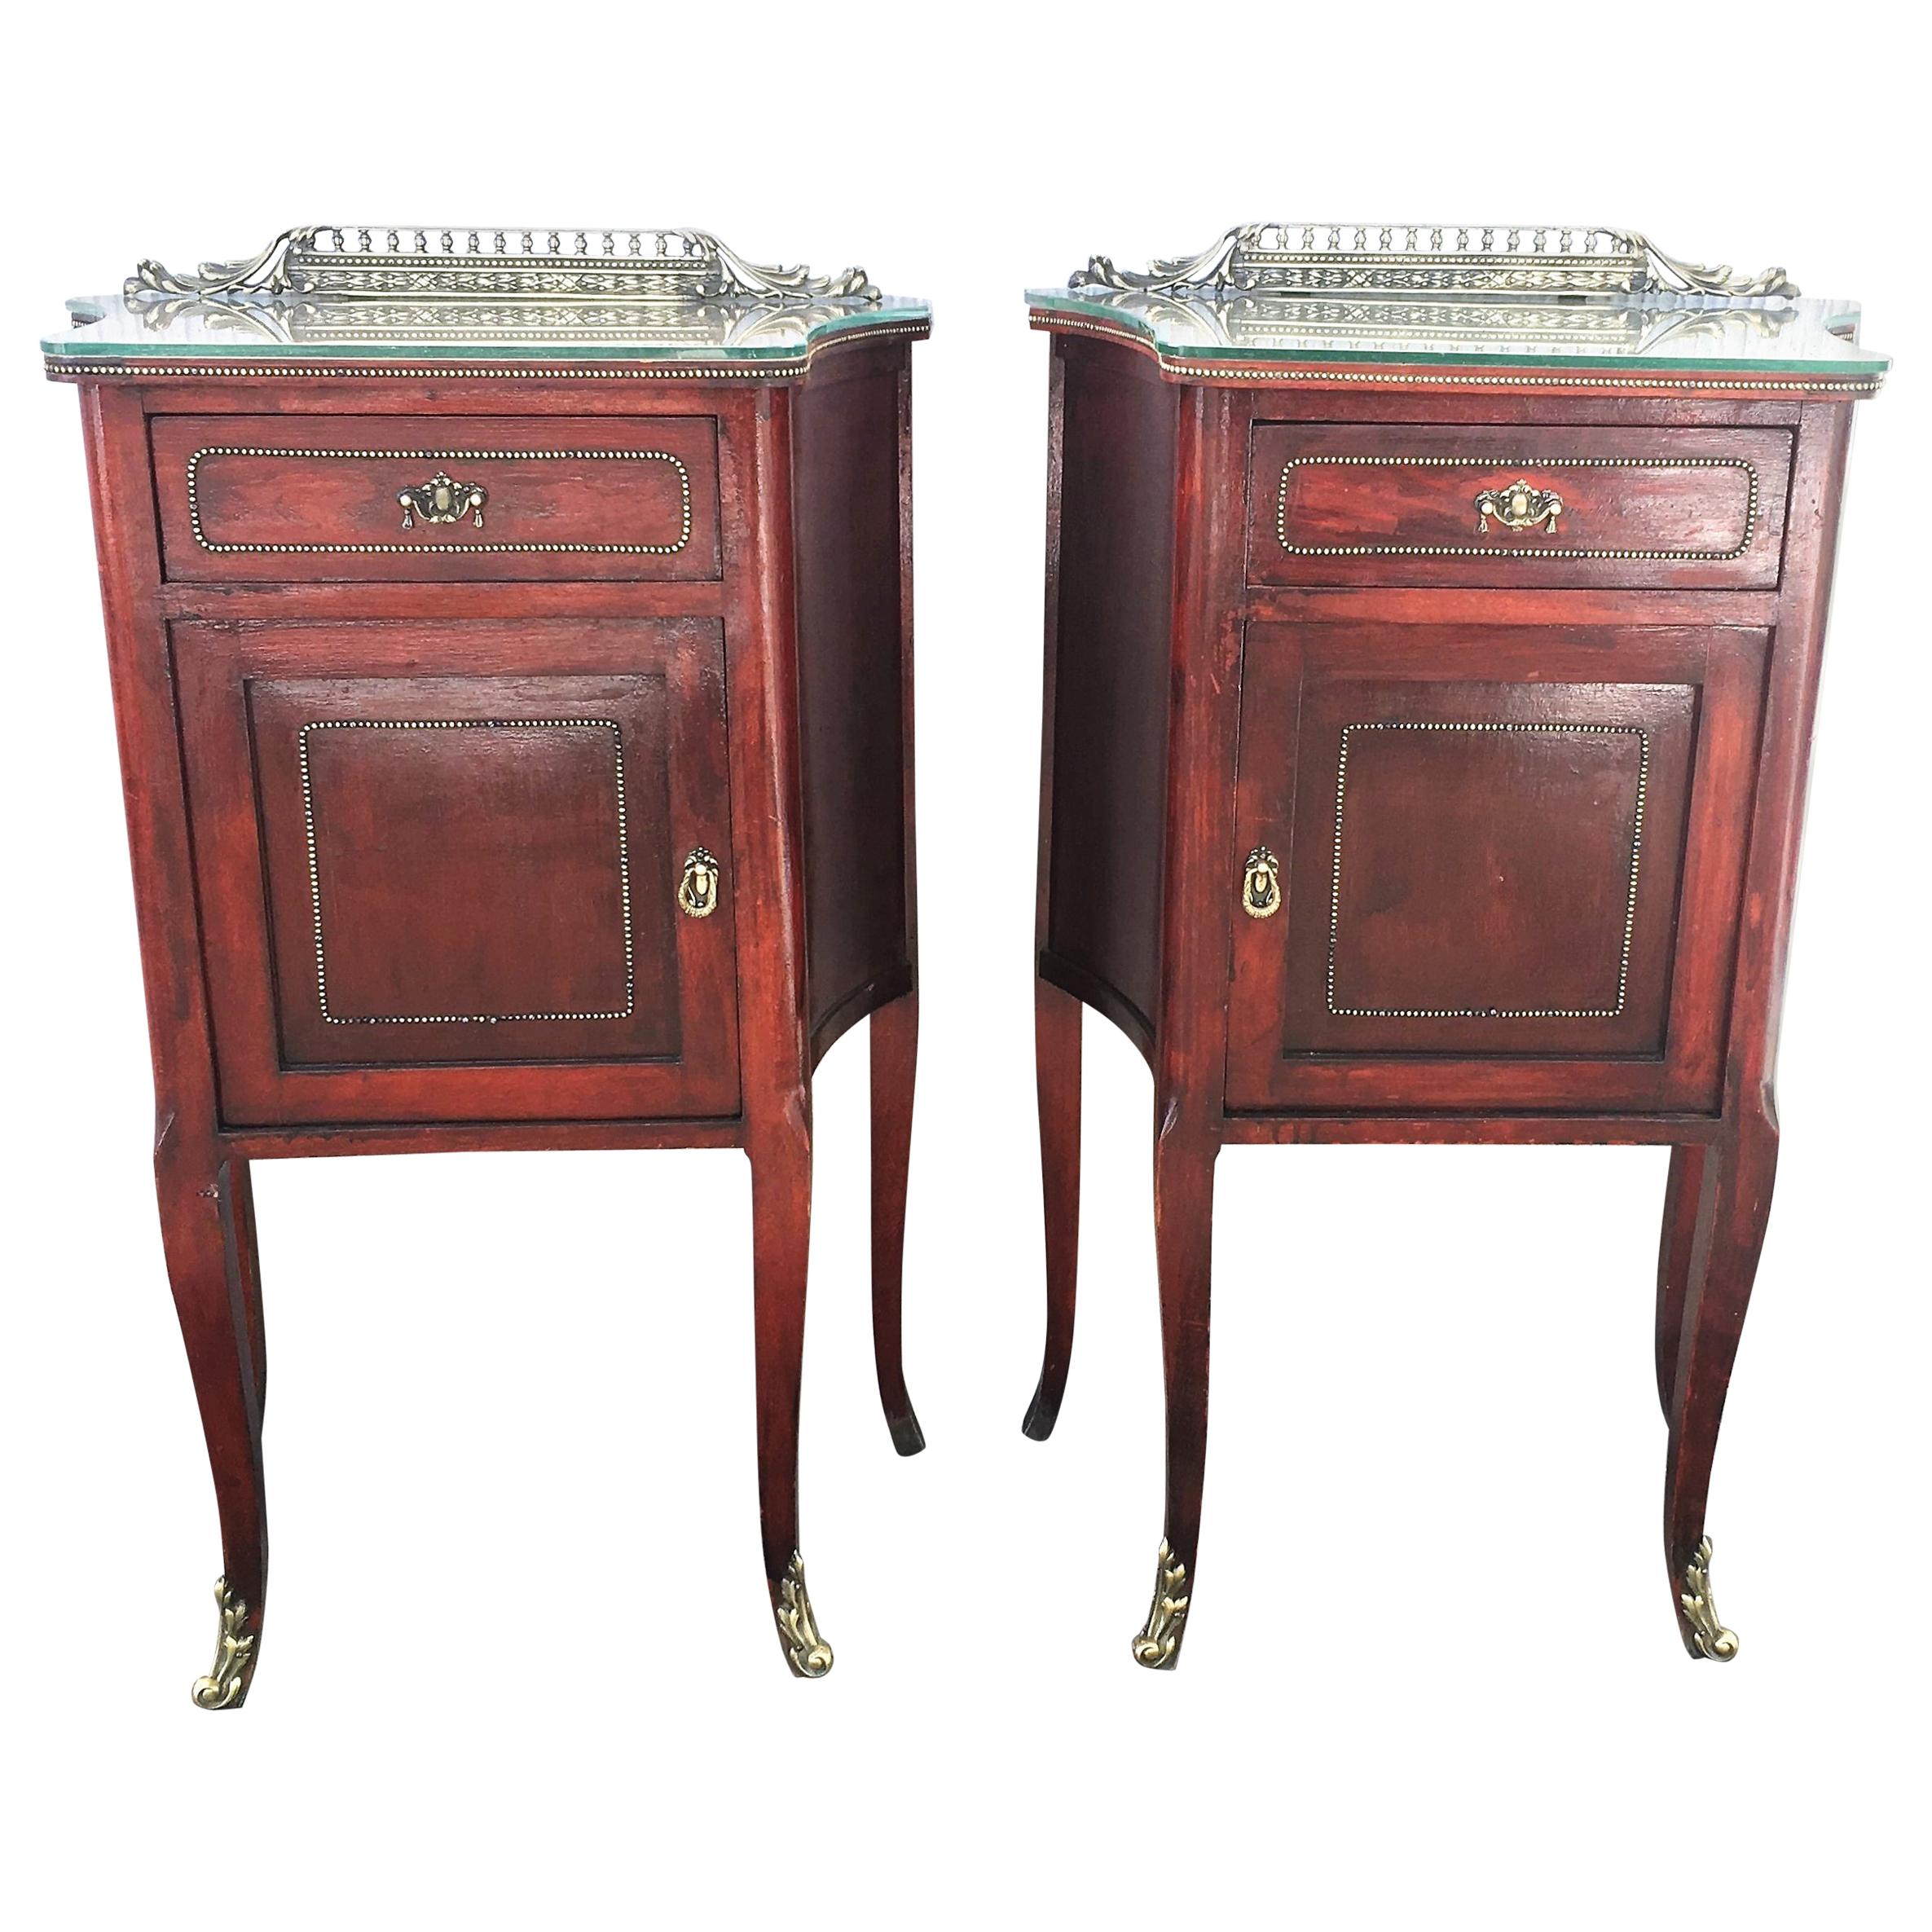 20th Mid-Century Modern Pair of Nightstands with Glass Top and Bronze Crest